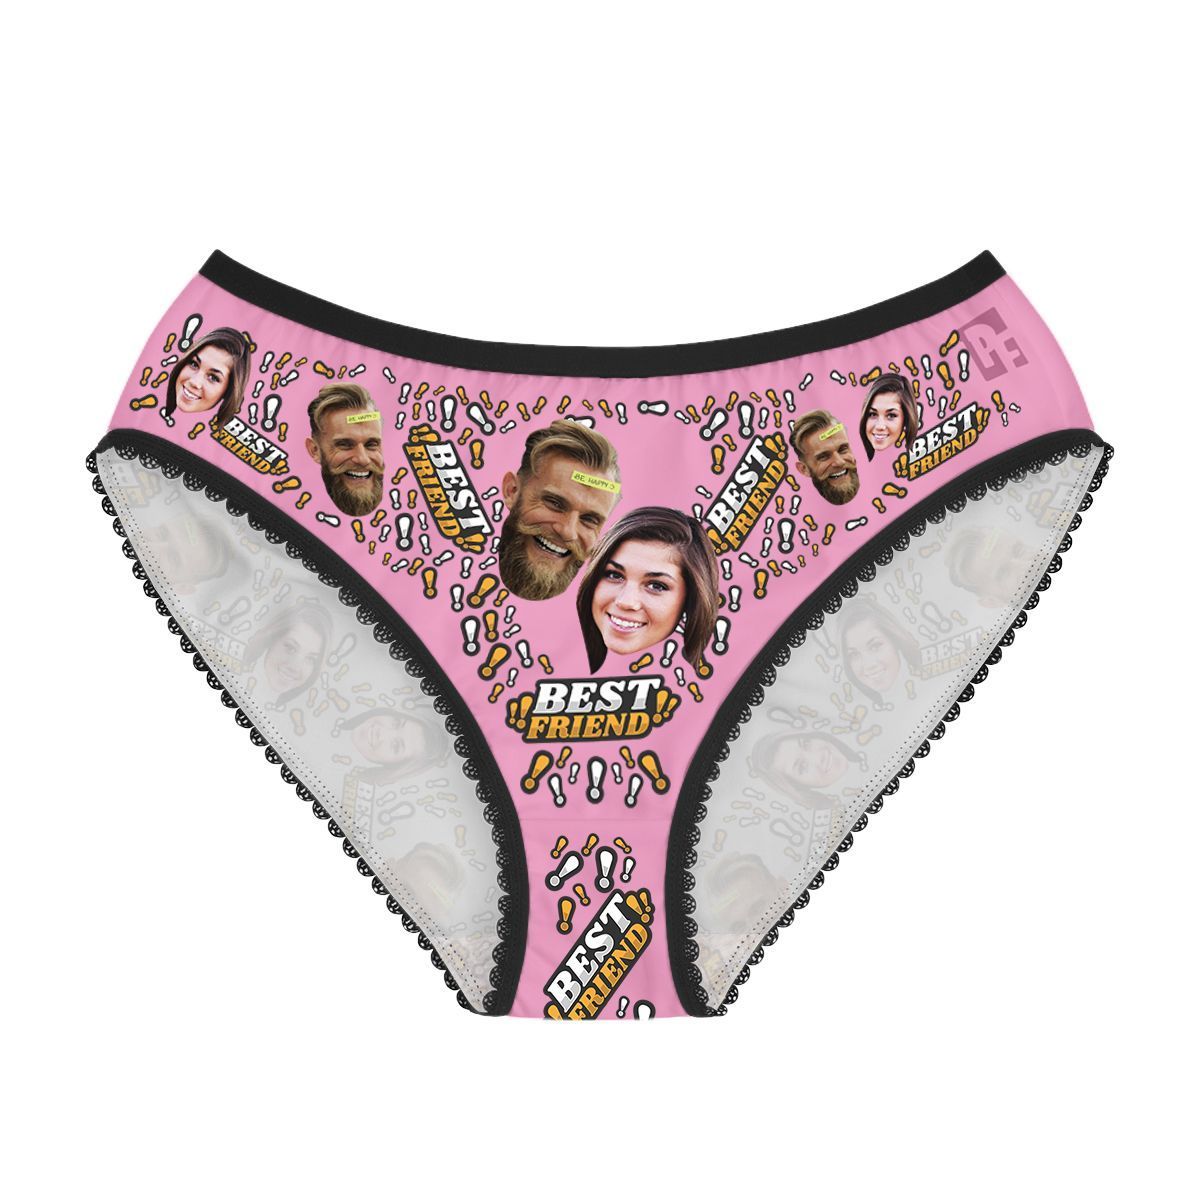 Red Best Friend women's underwear briefs personalized with photo printed on them